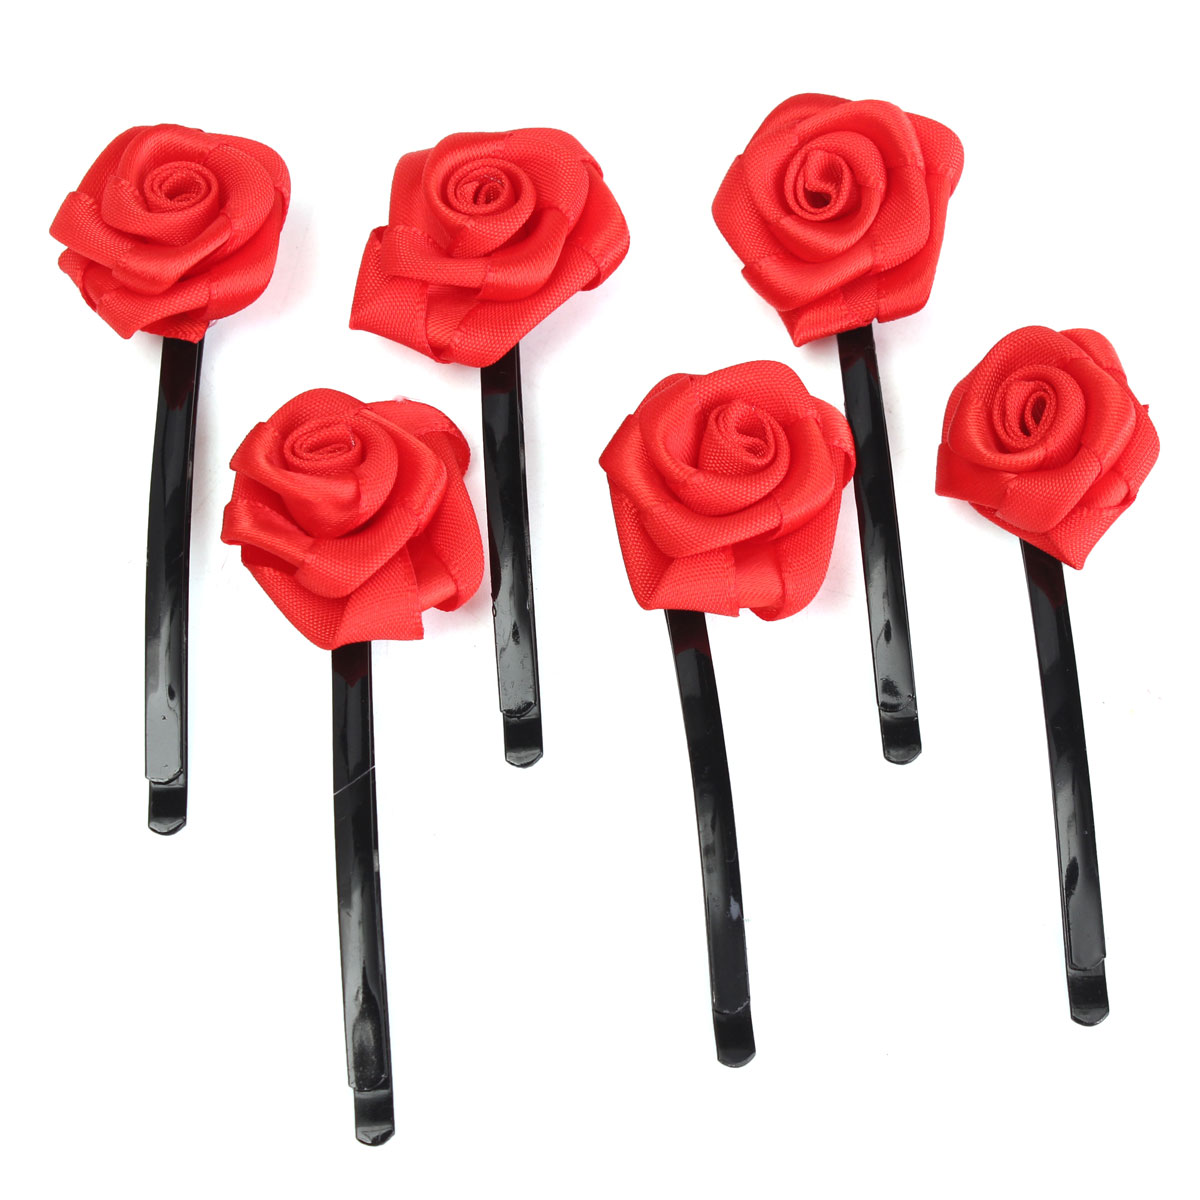 6pcs-Rose-Flowers-Hair-Pins-Grips-Clips-Accessories-for-Wedding-Party-1037583-9